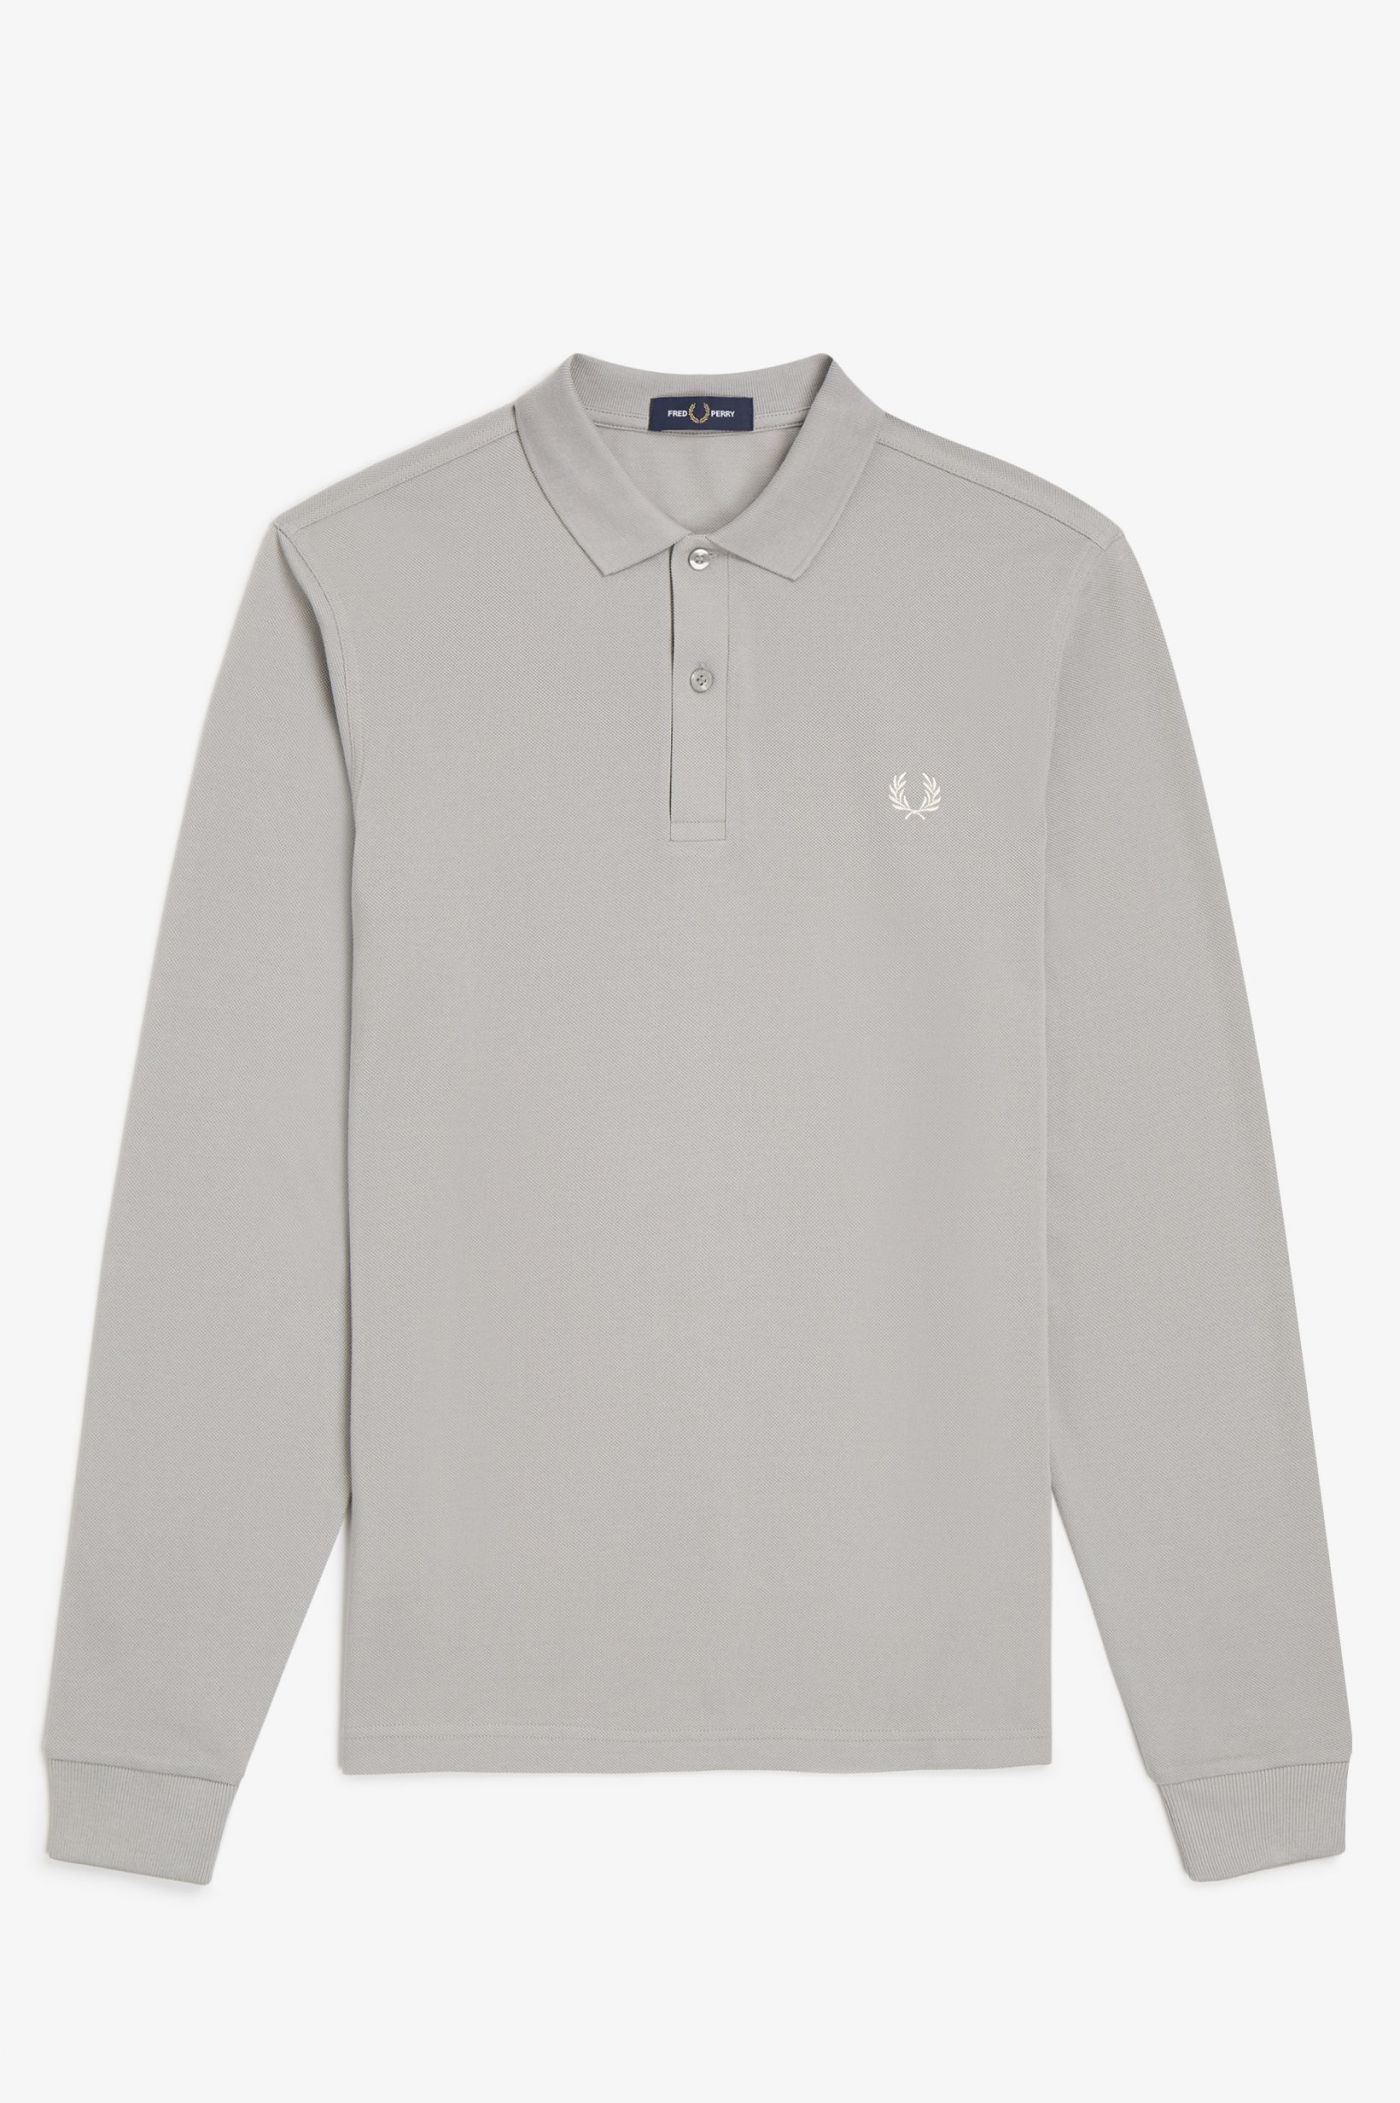 M6006 - Limestone | The Fred Perry Shirt | Men's Short & Long Sleeve ...